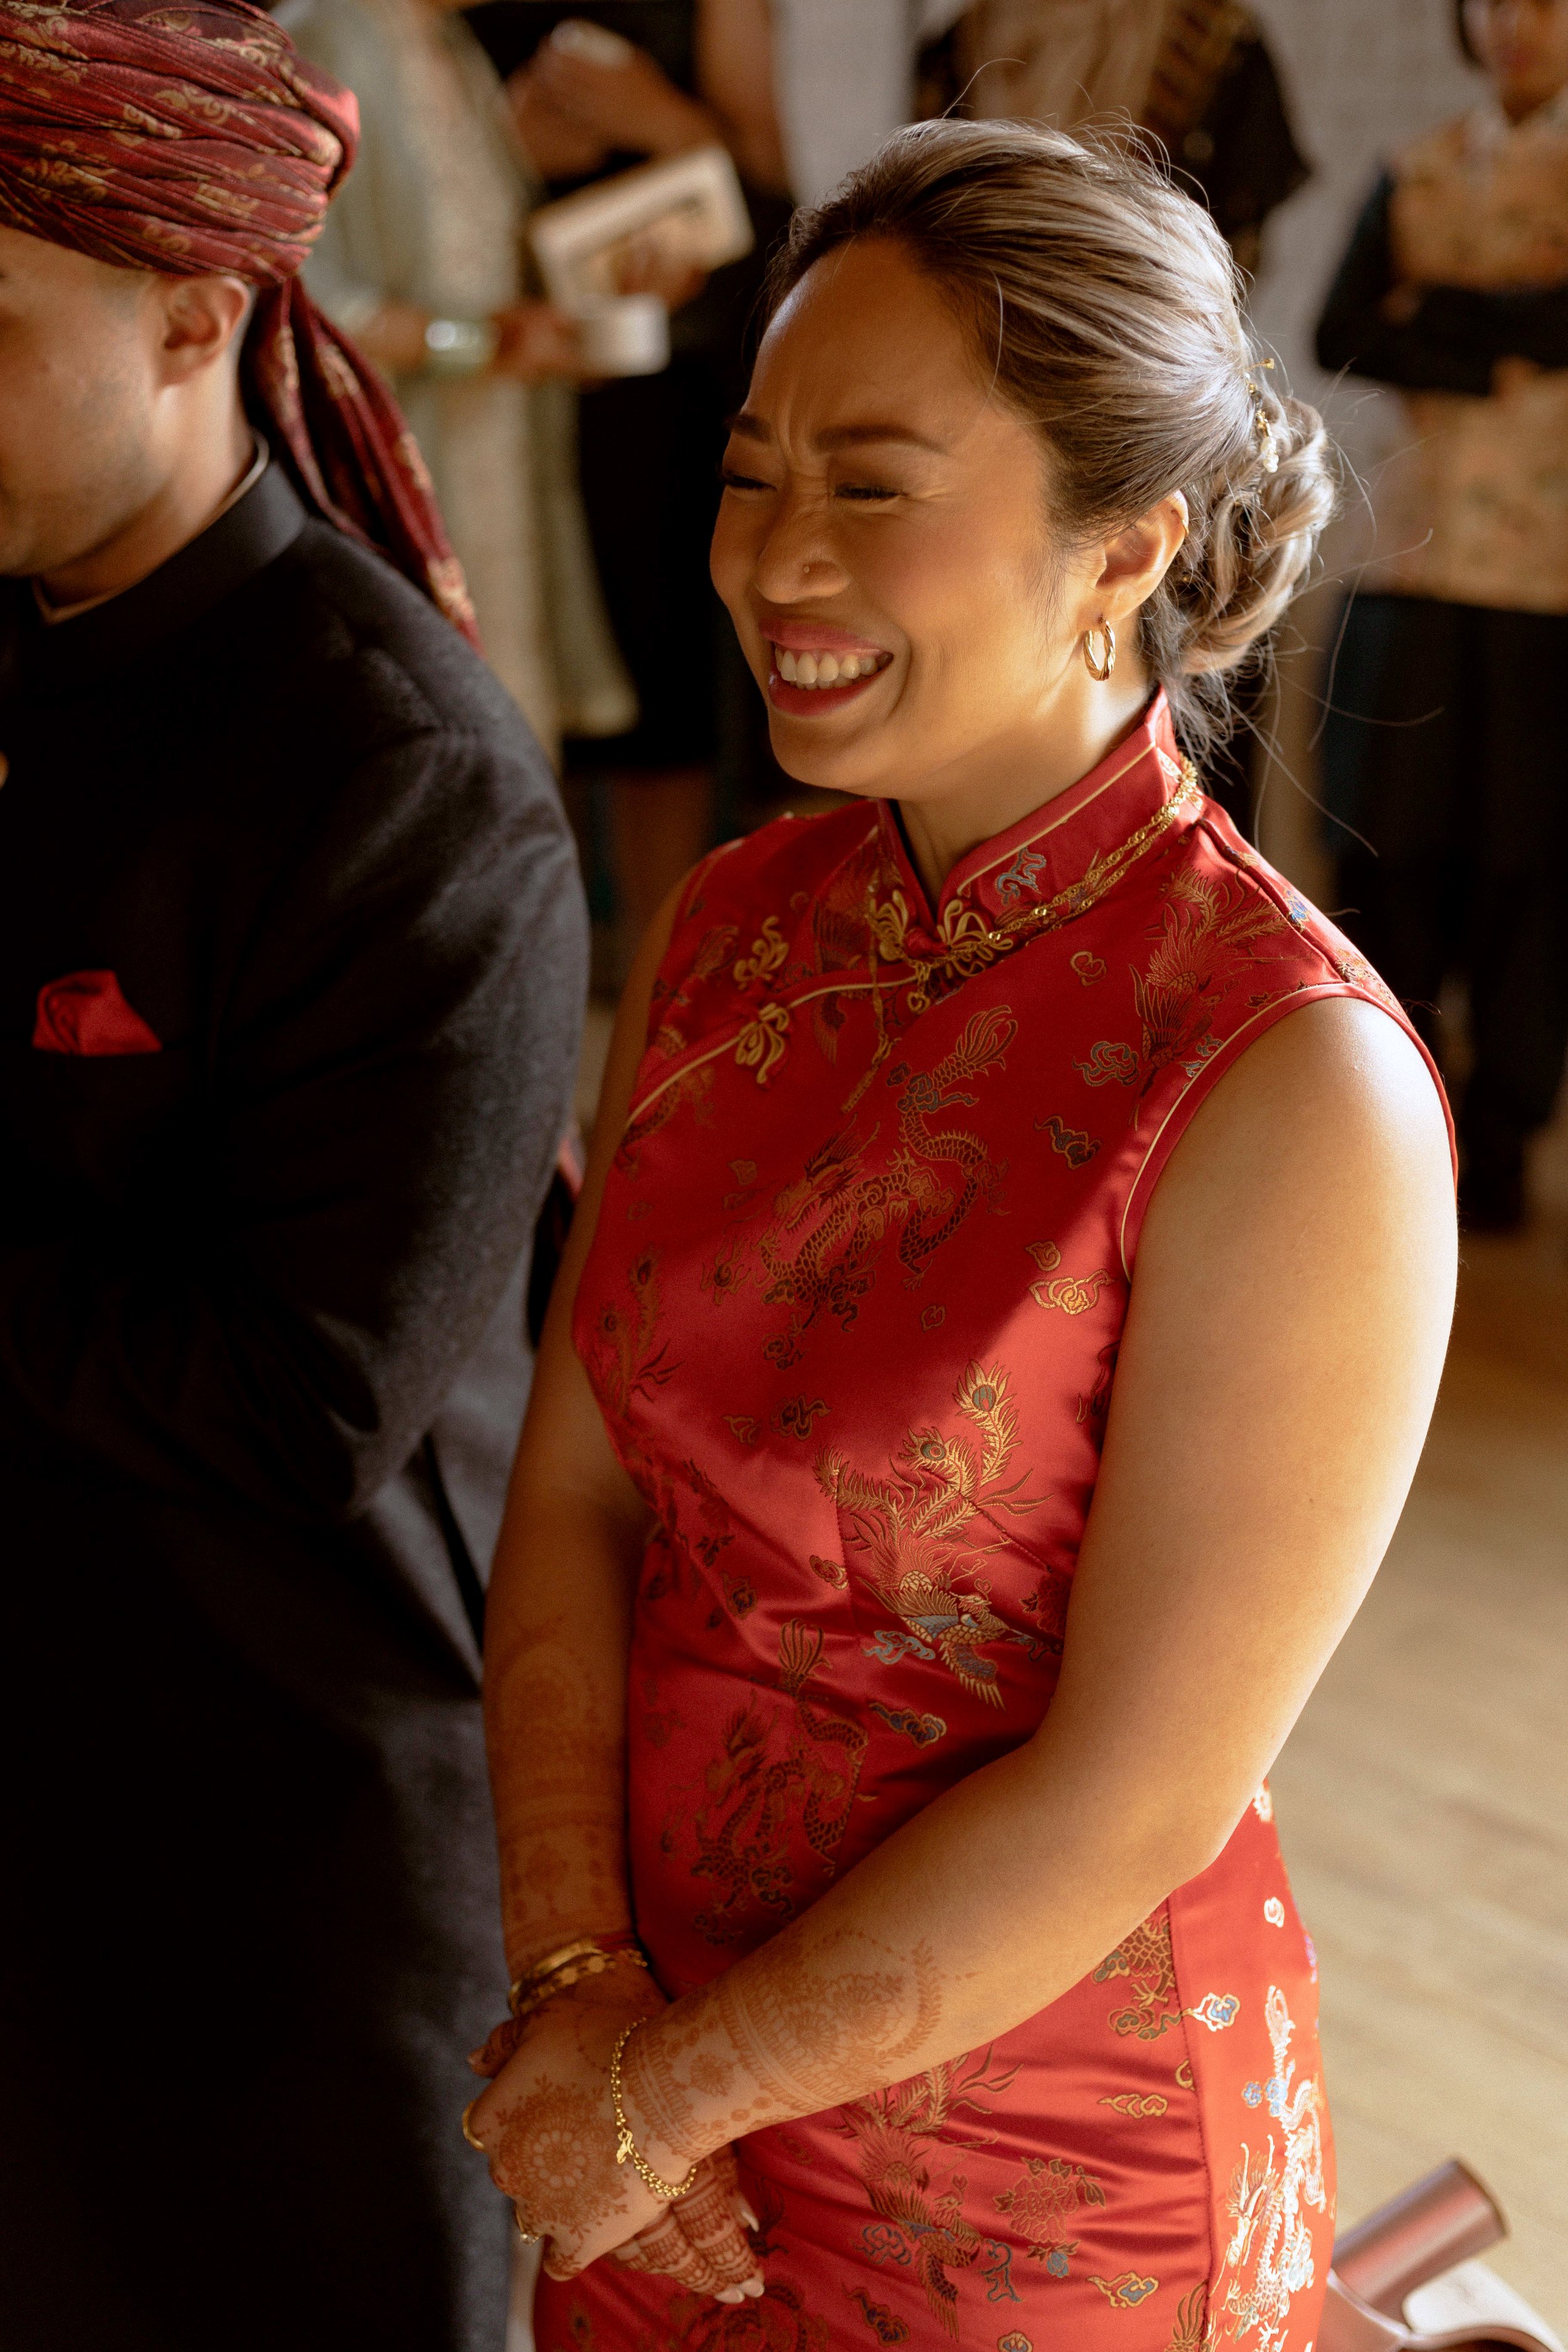 bride laughing and smiling during wedding ceremony